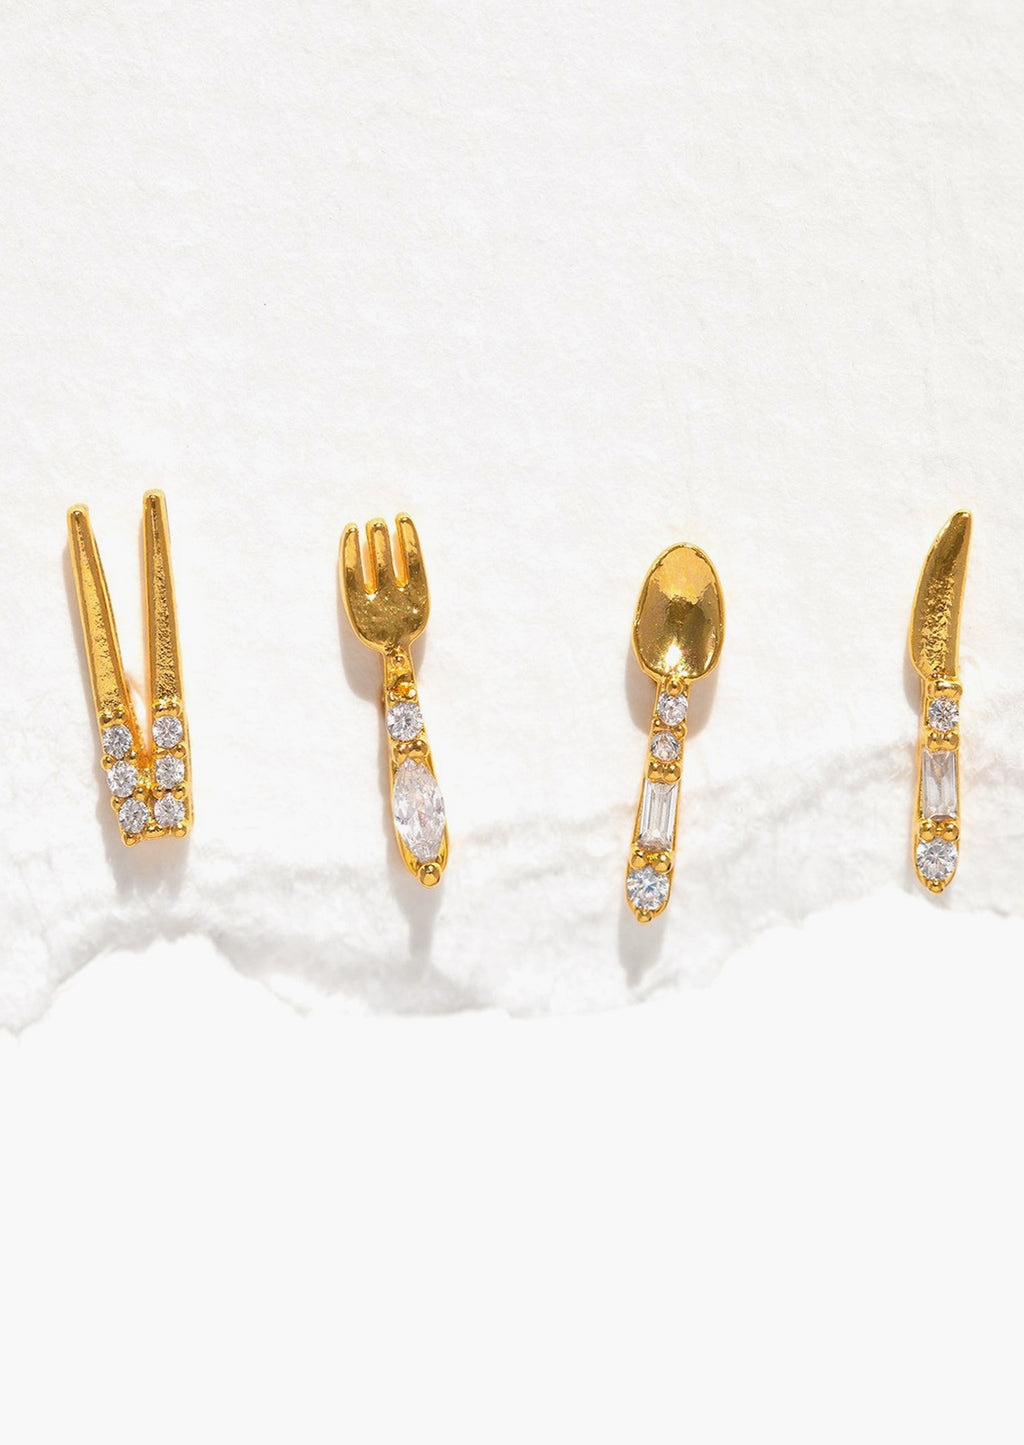 Gold: A set of four gold stud earrings in shape of chopsticks, fork, spoon, and knife.